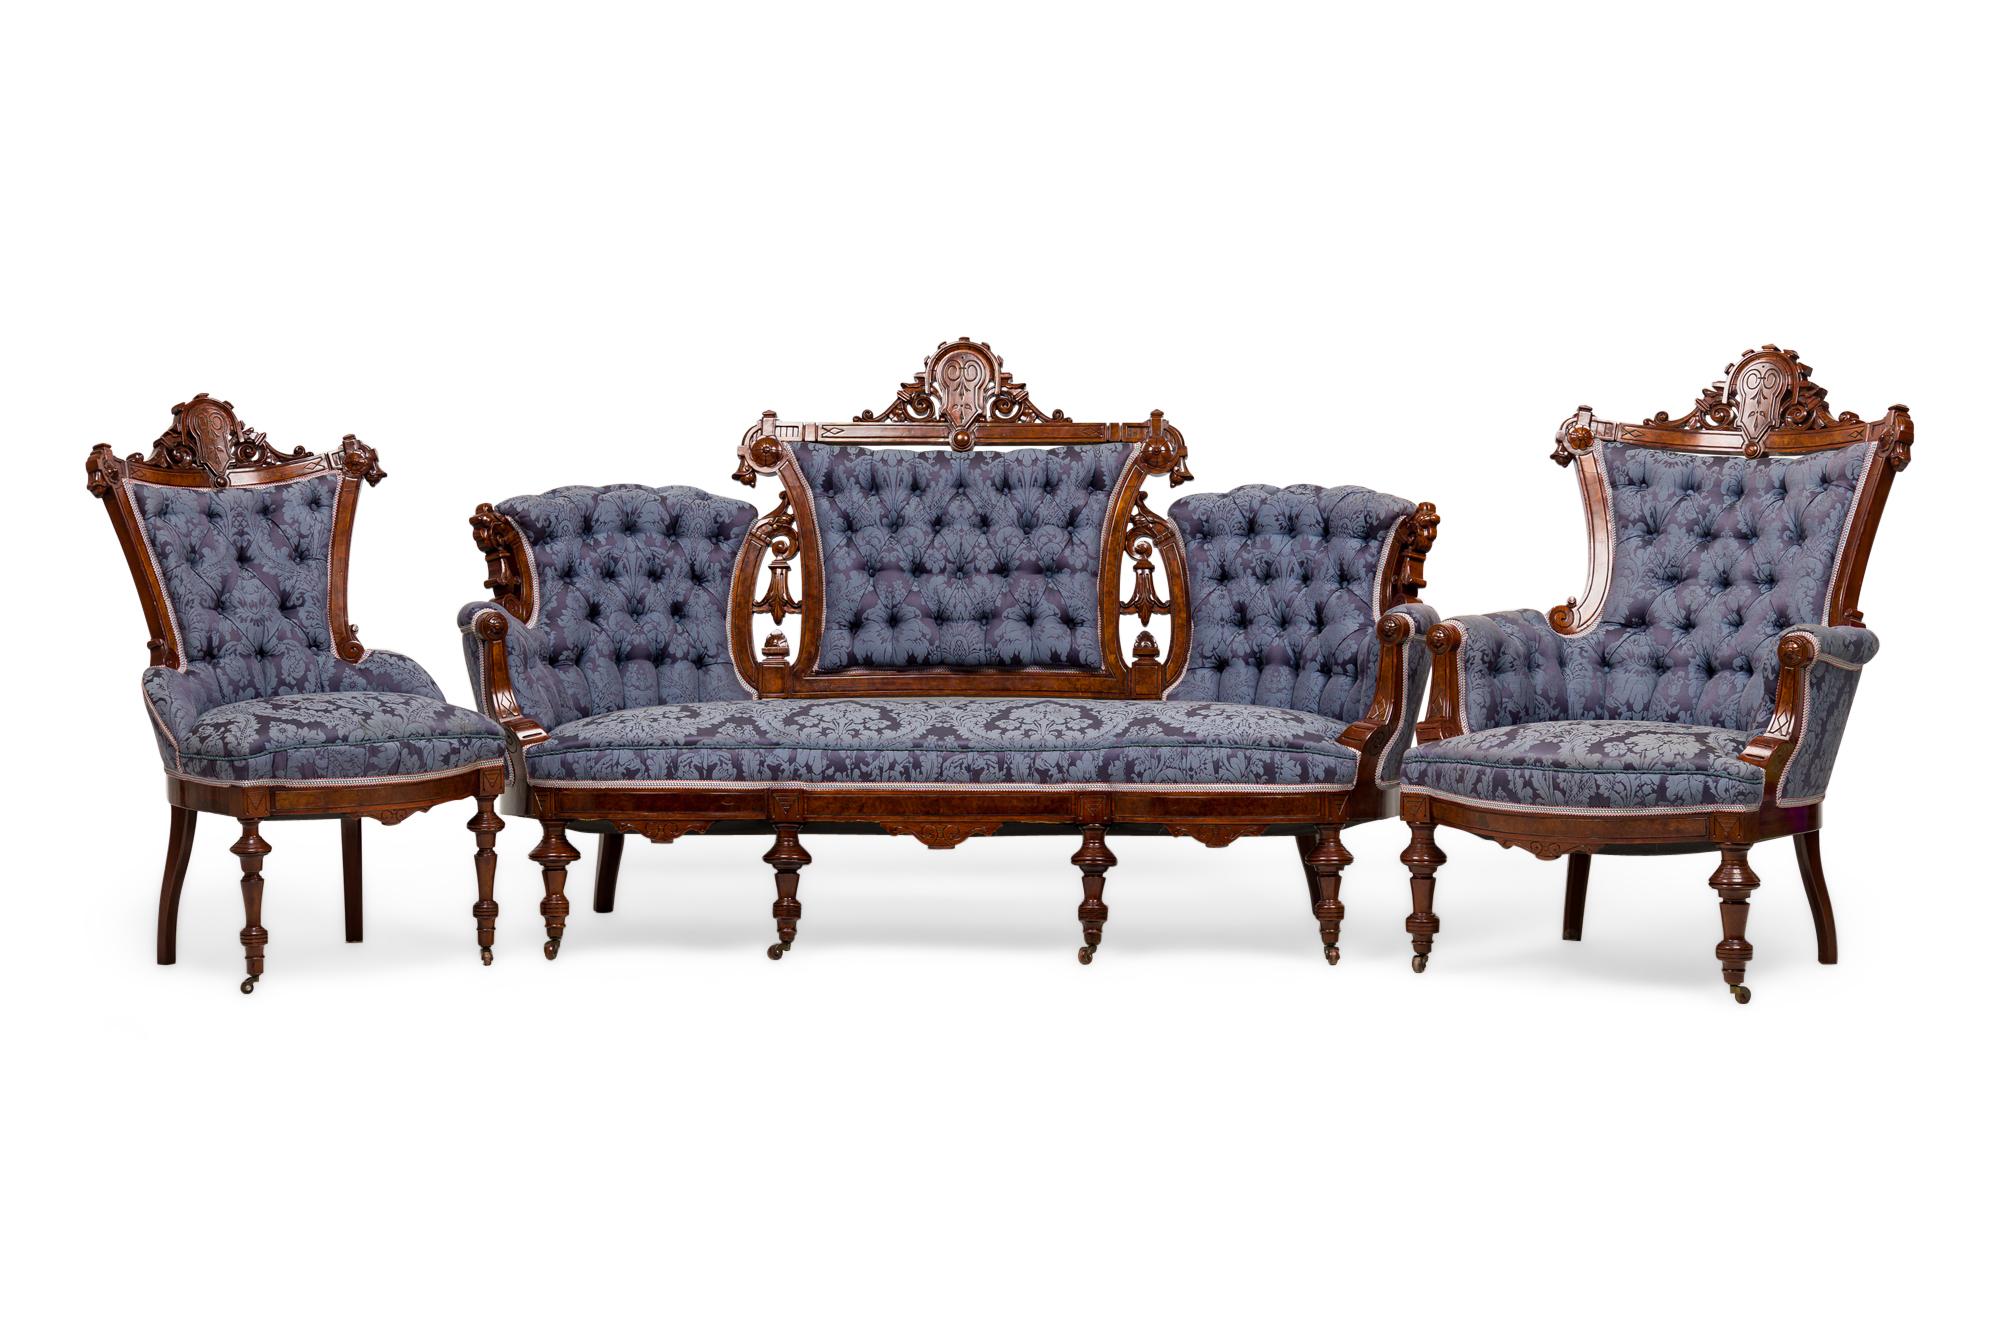 6 Piece American Victorian living room salon set including a settee, an armchair, and 4 side chairs with carved mahogany frames featuring crest pediments and turned legs, upholstered in a two-toned blue damask with a scroll and foliate pattern with